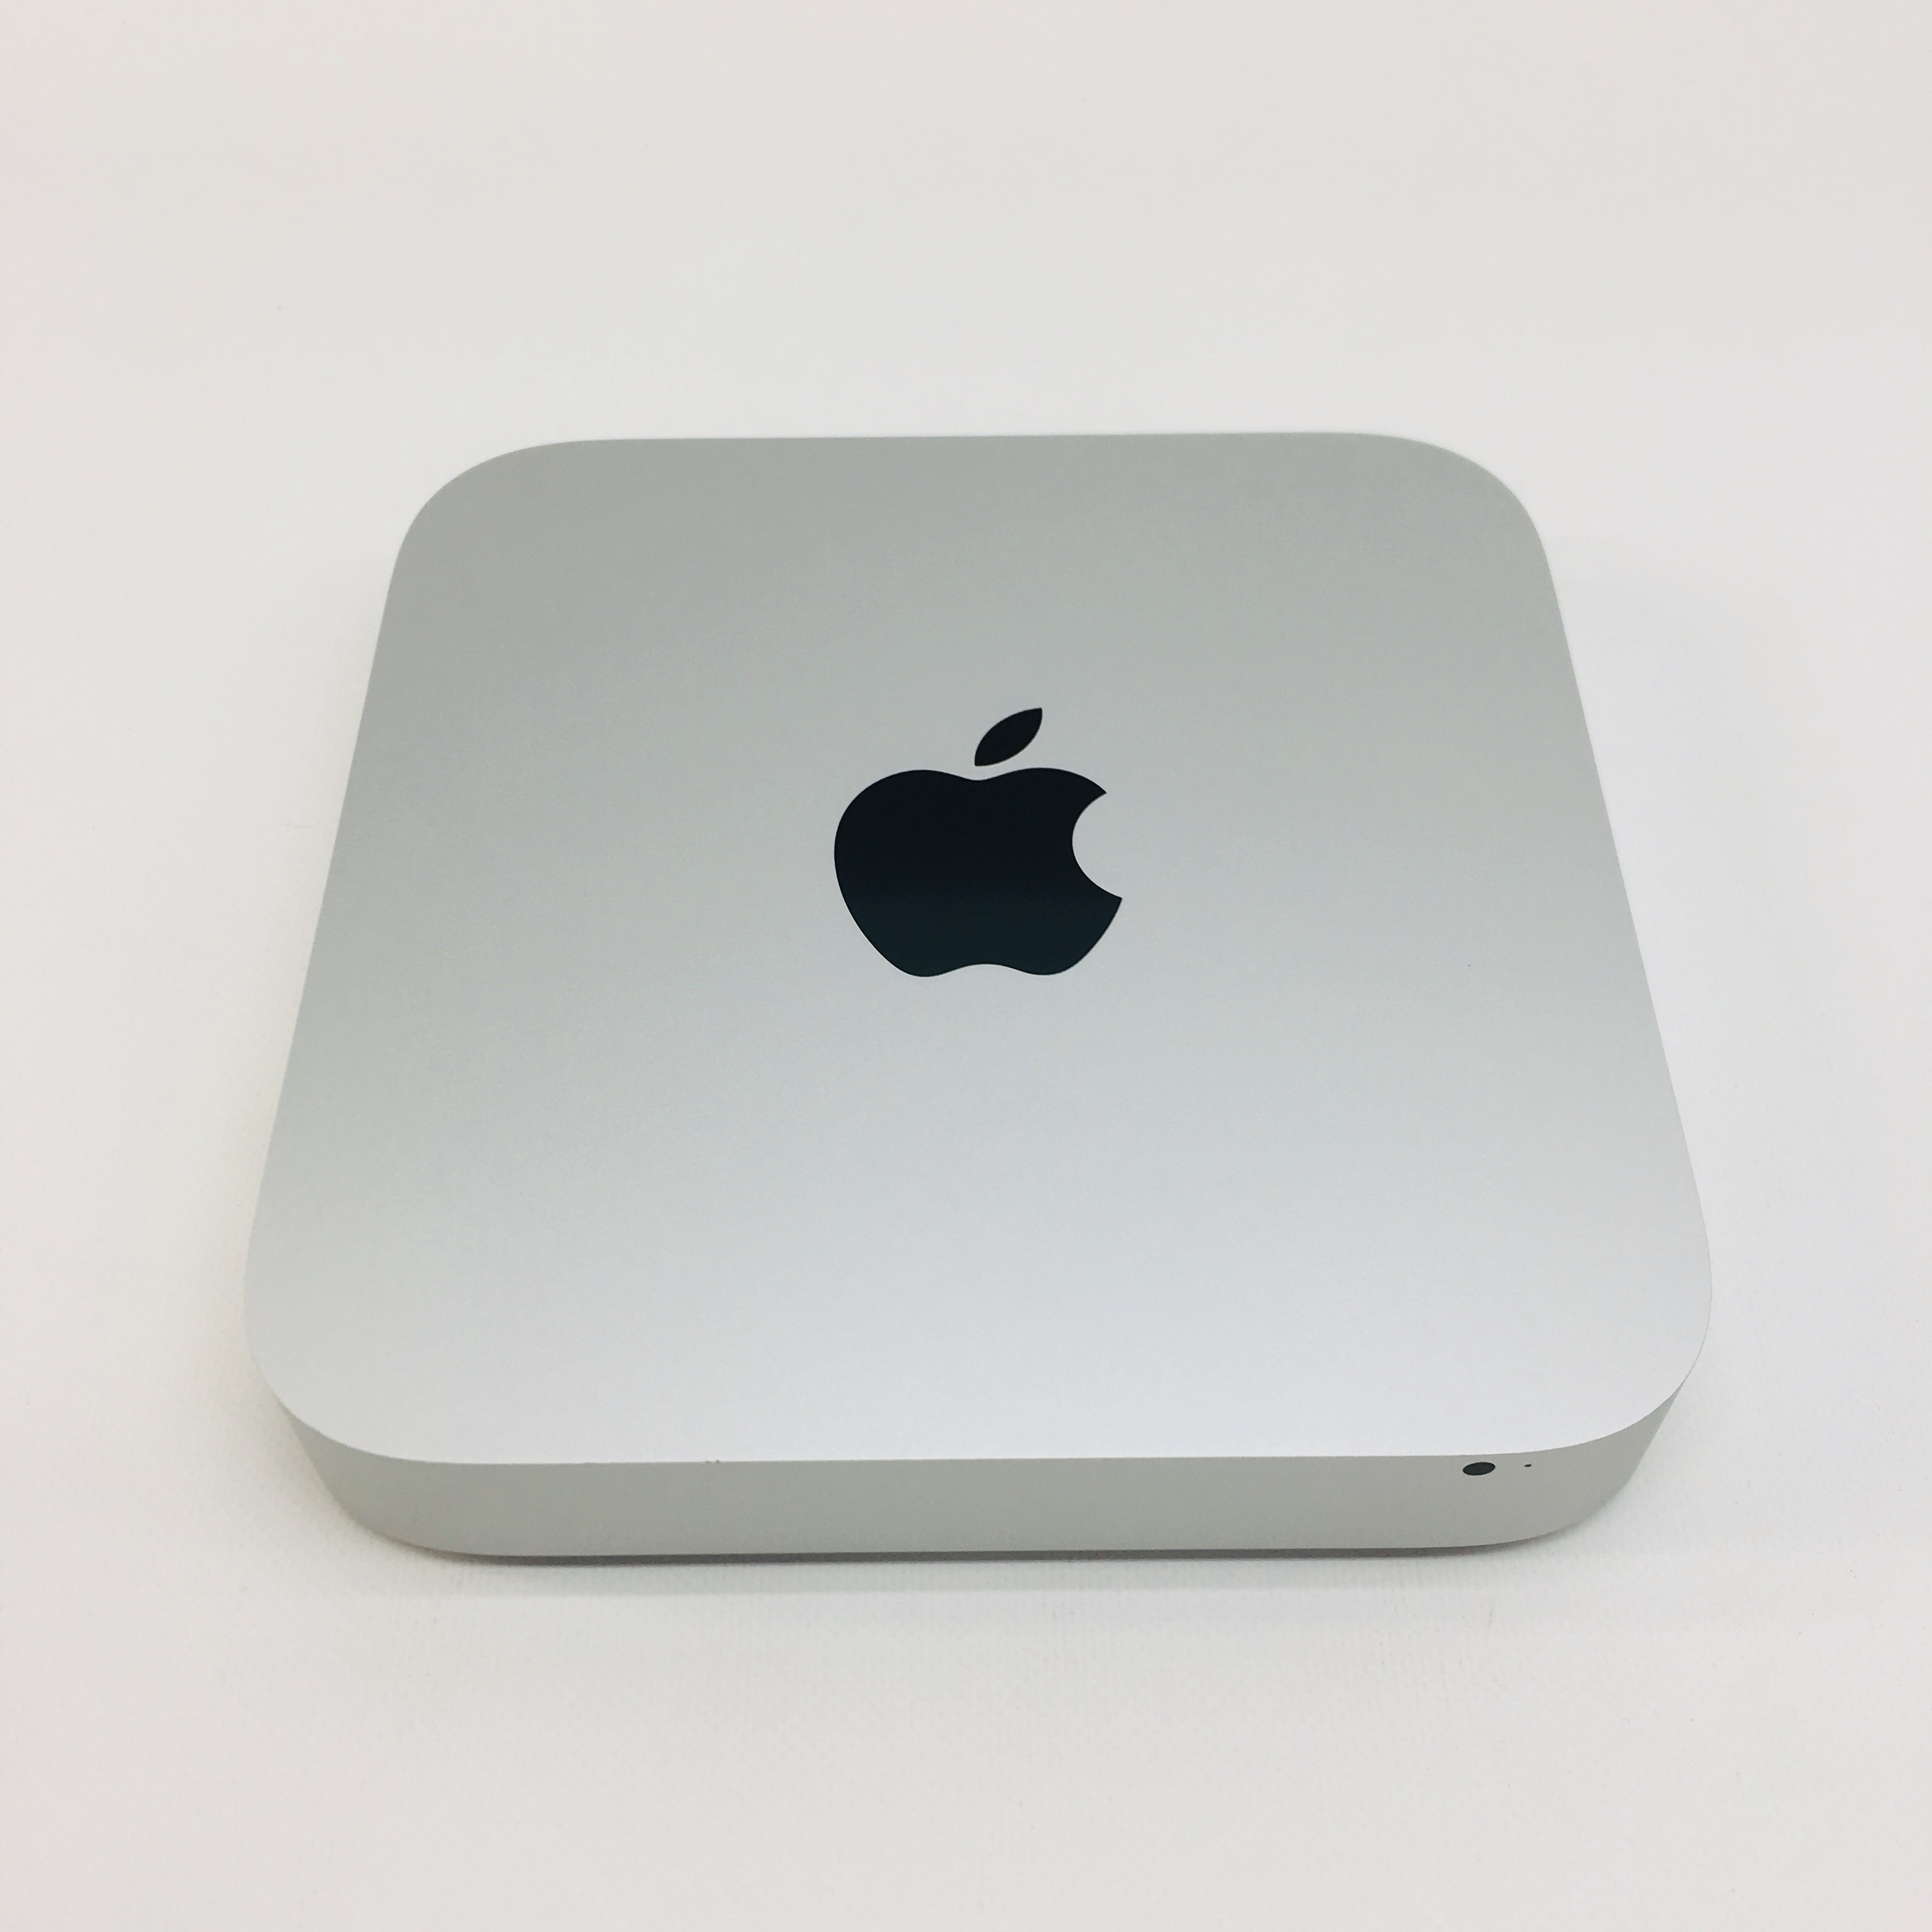 what is max ram for mid 2011 mac mini